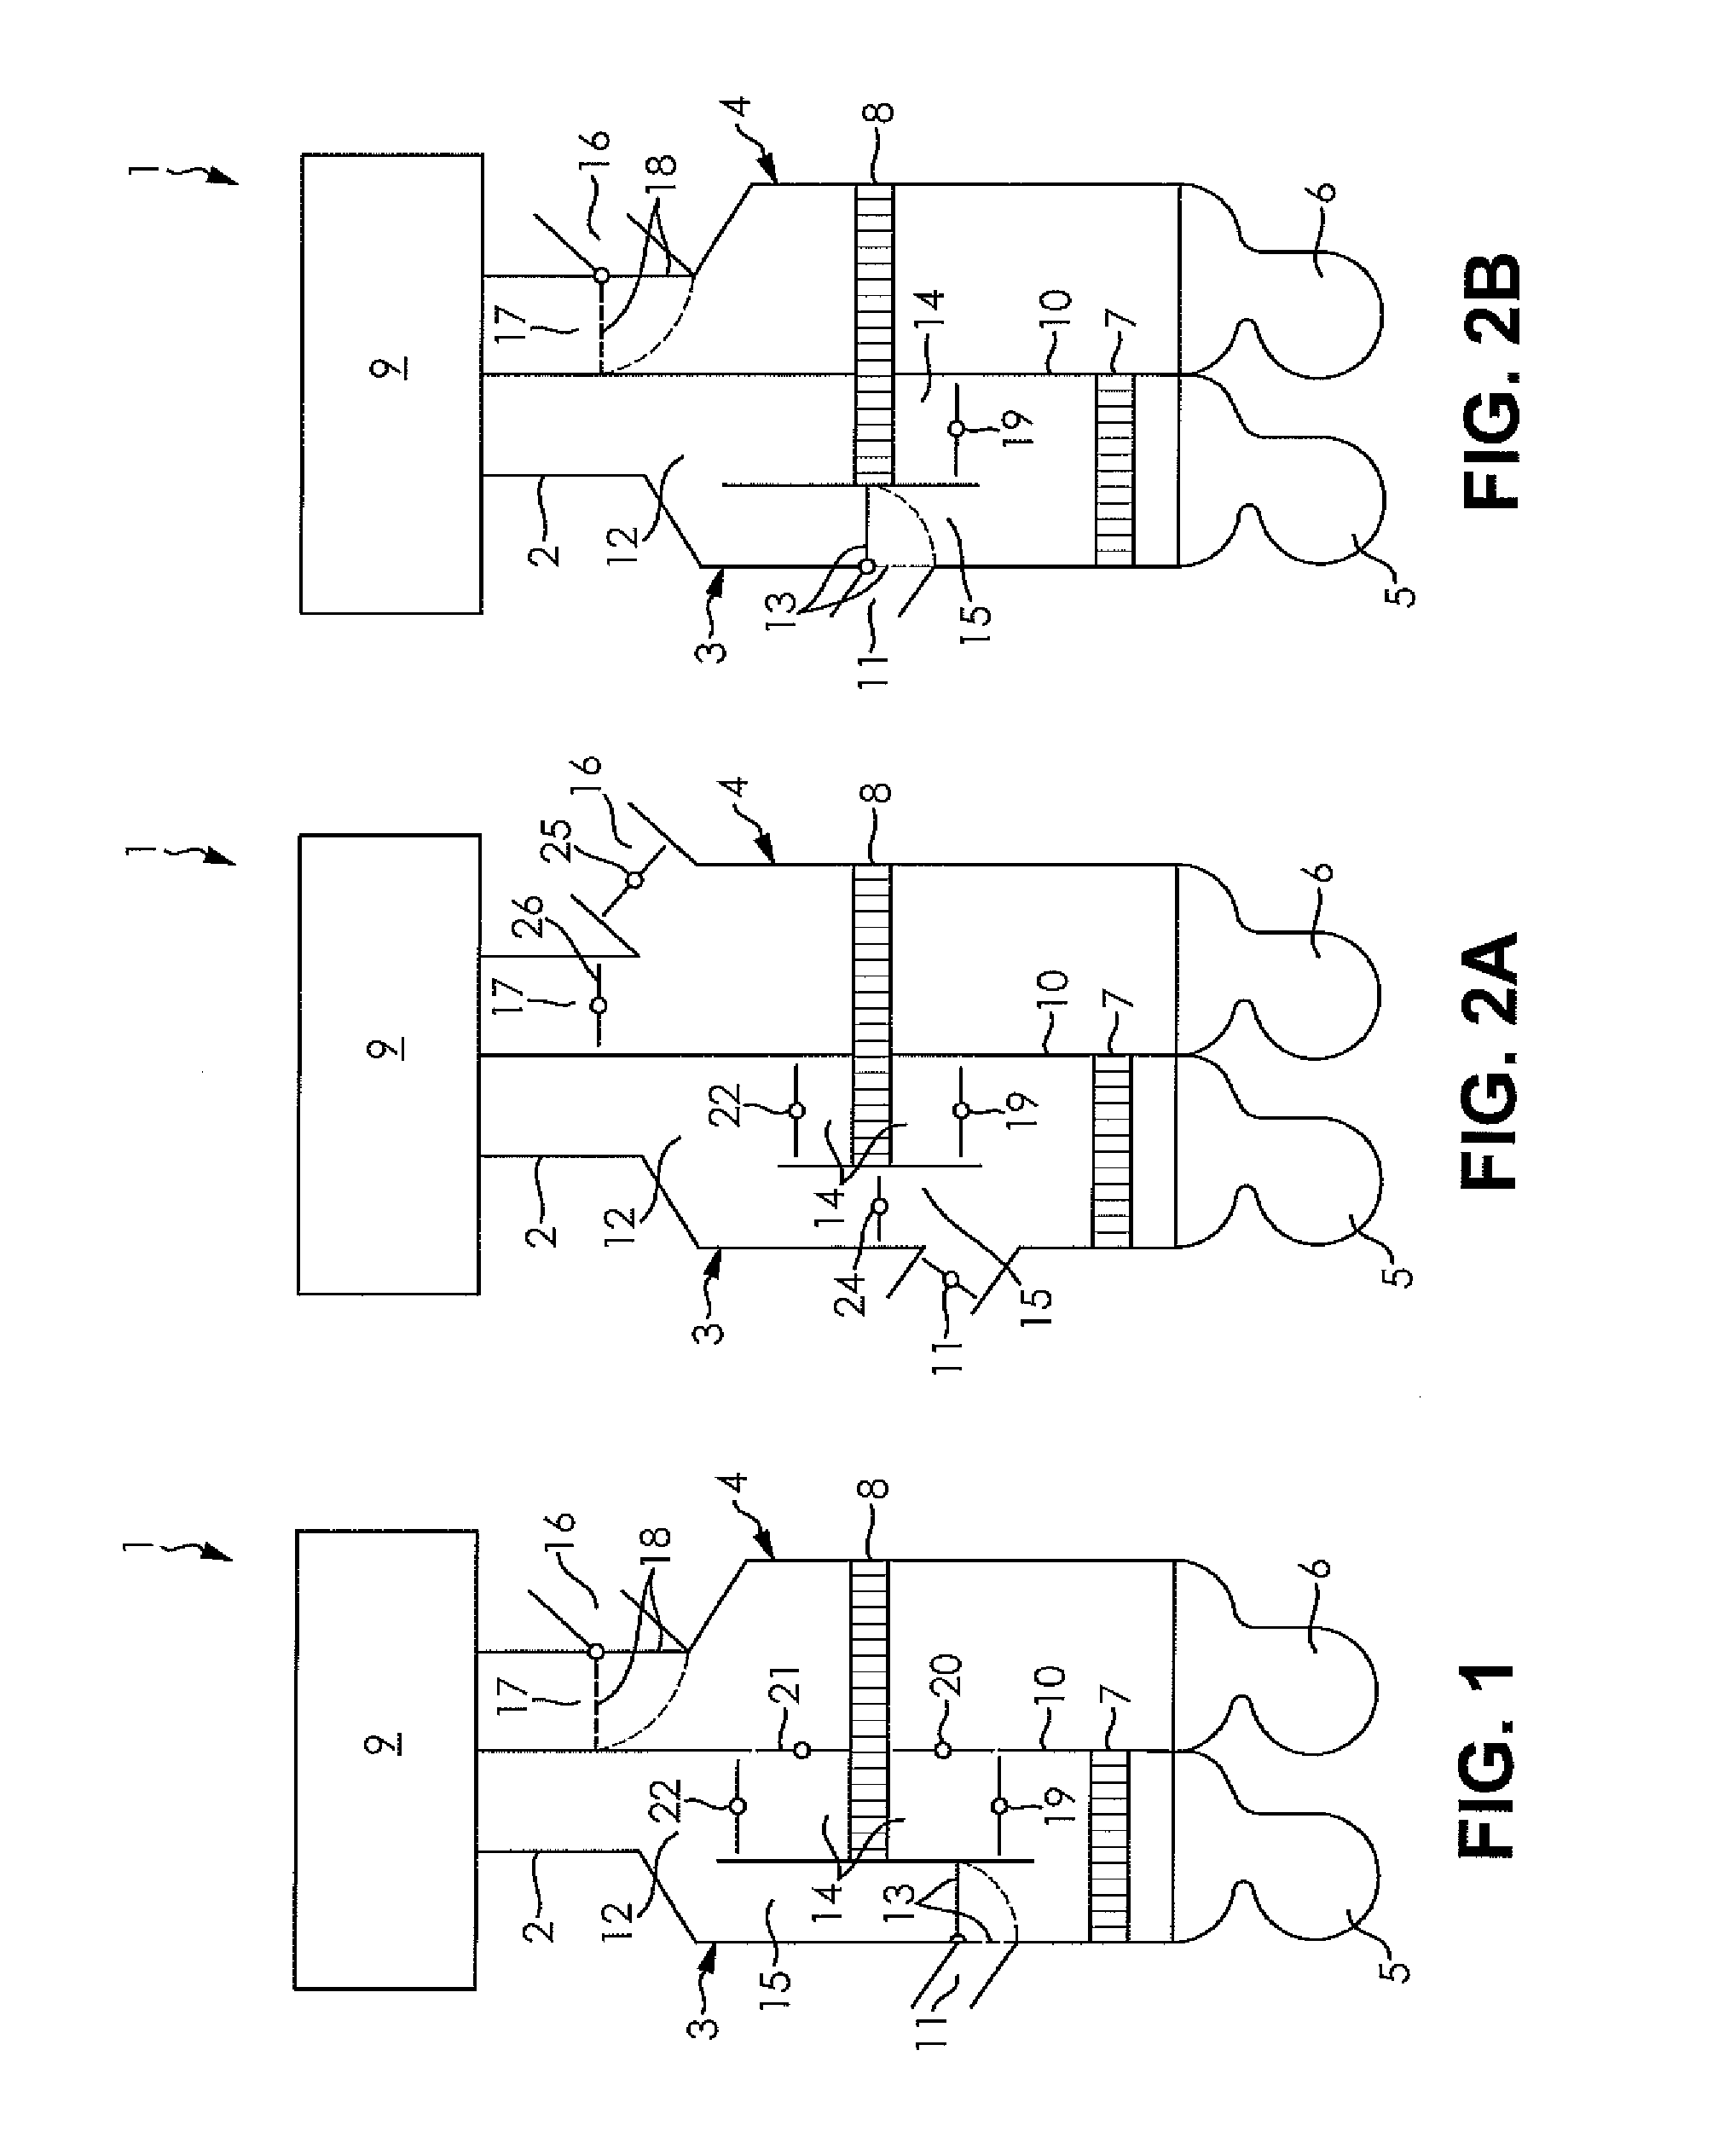 Heat exchanger arrangement for heat uptake and air conditioning system of a motor vehicle